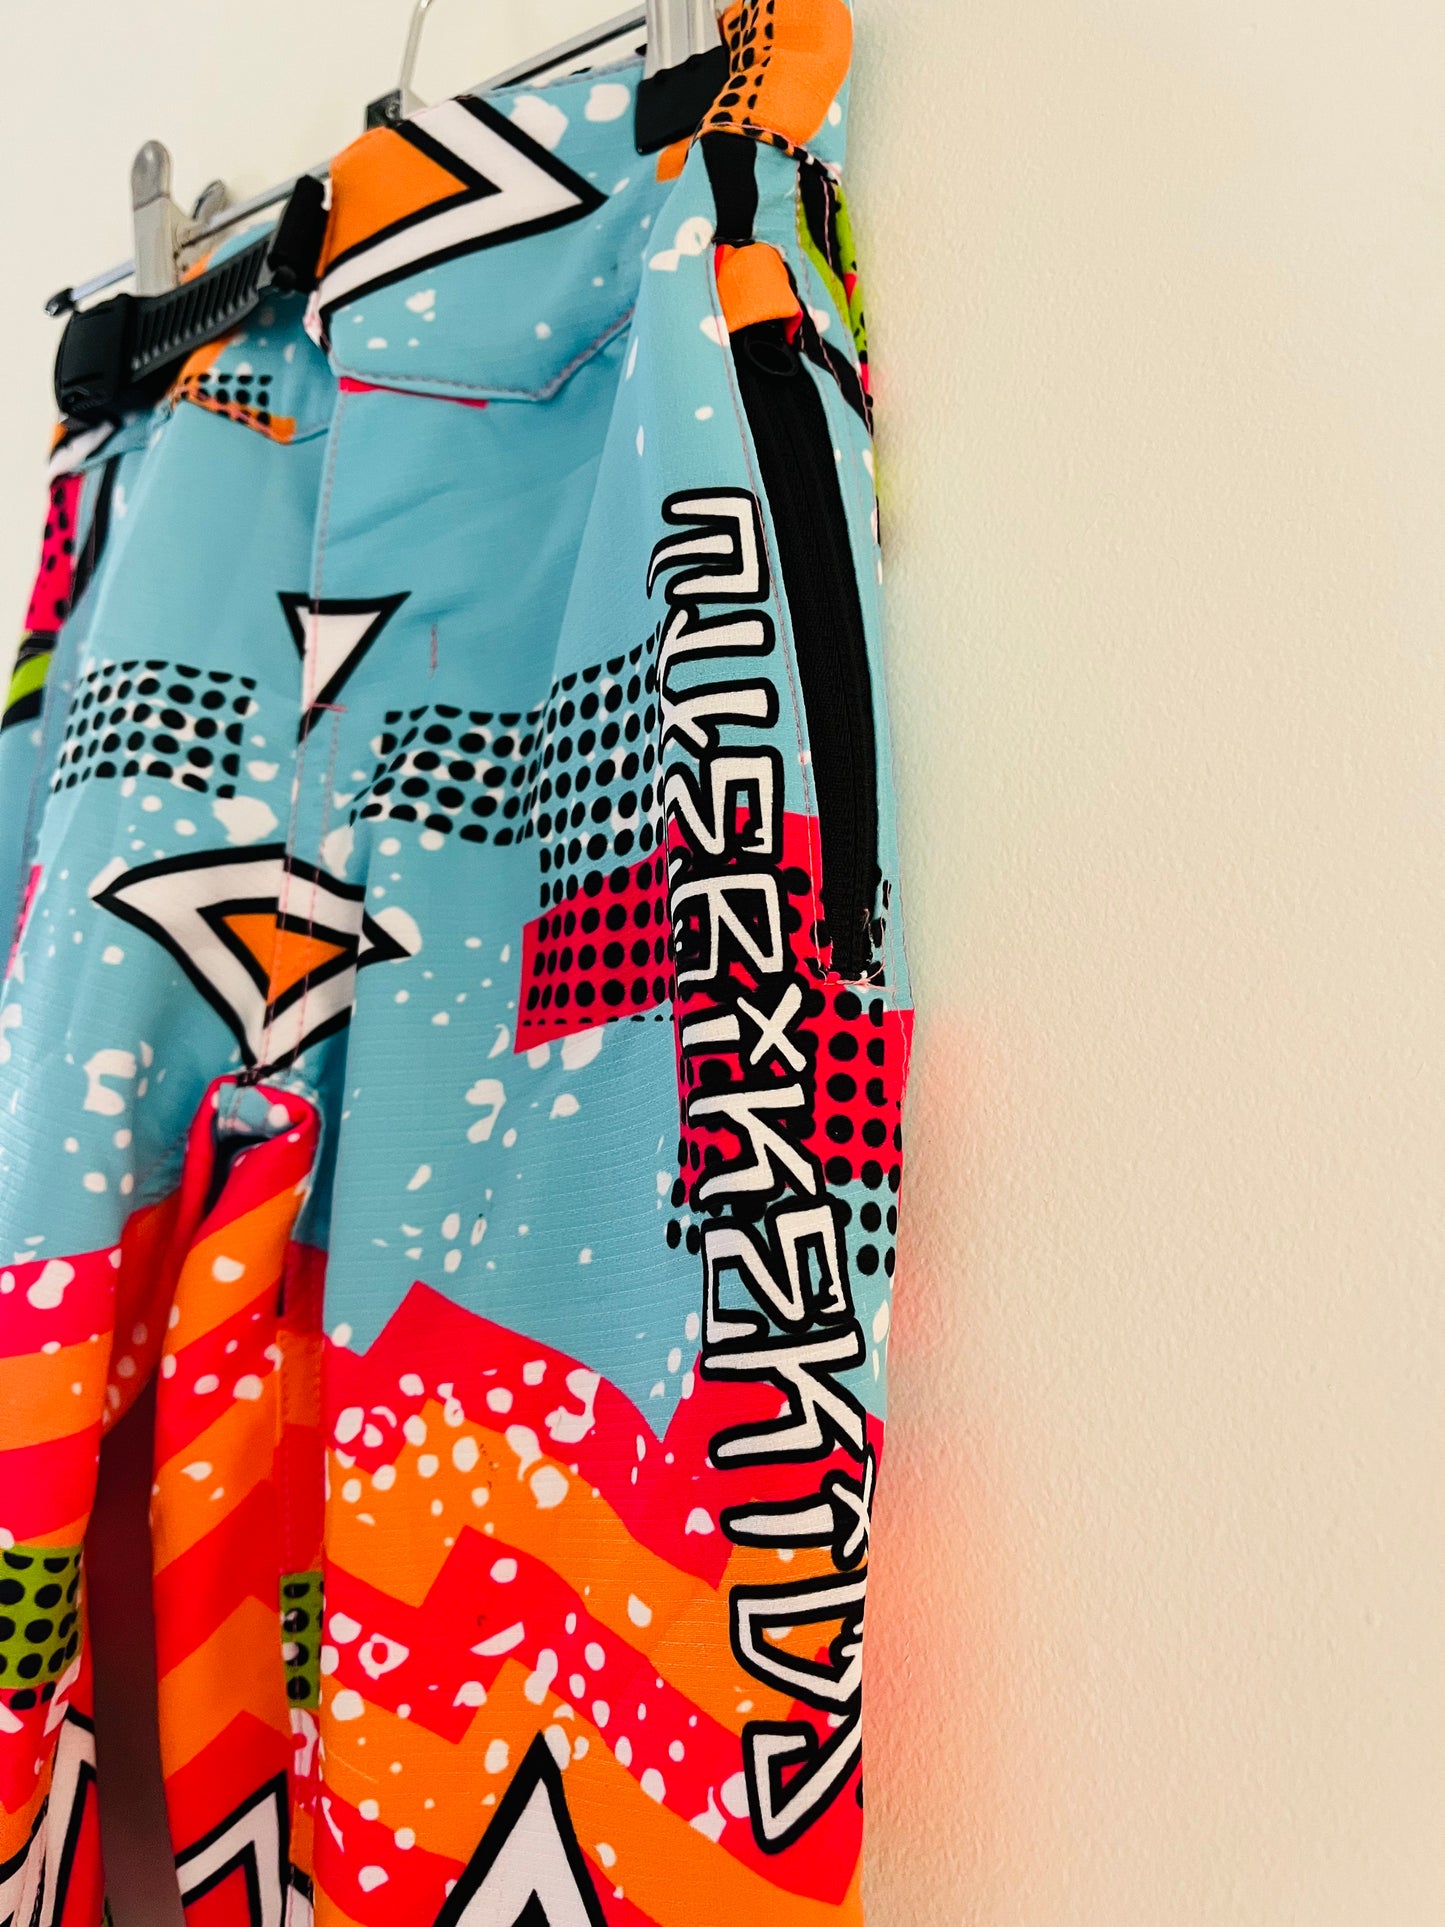 Colourful Race Pants with clip